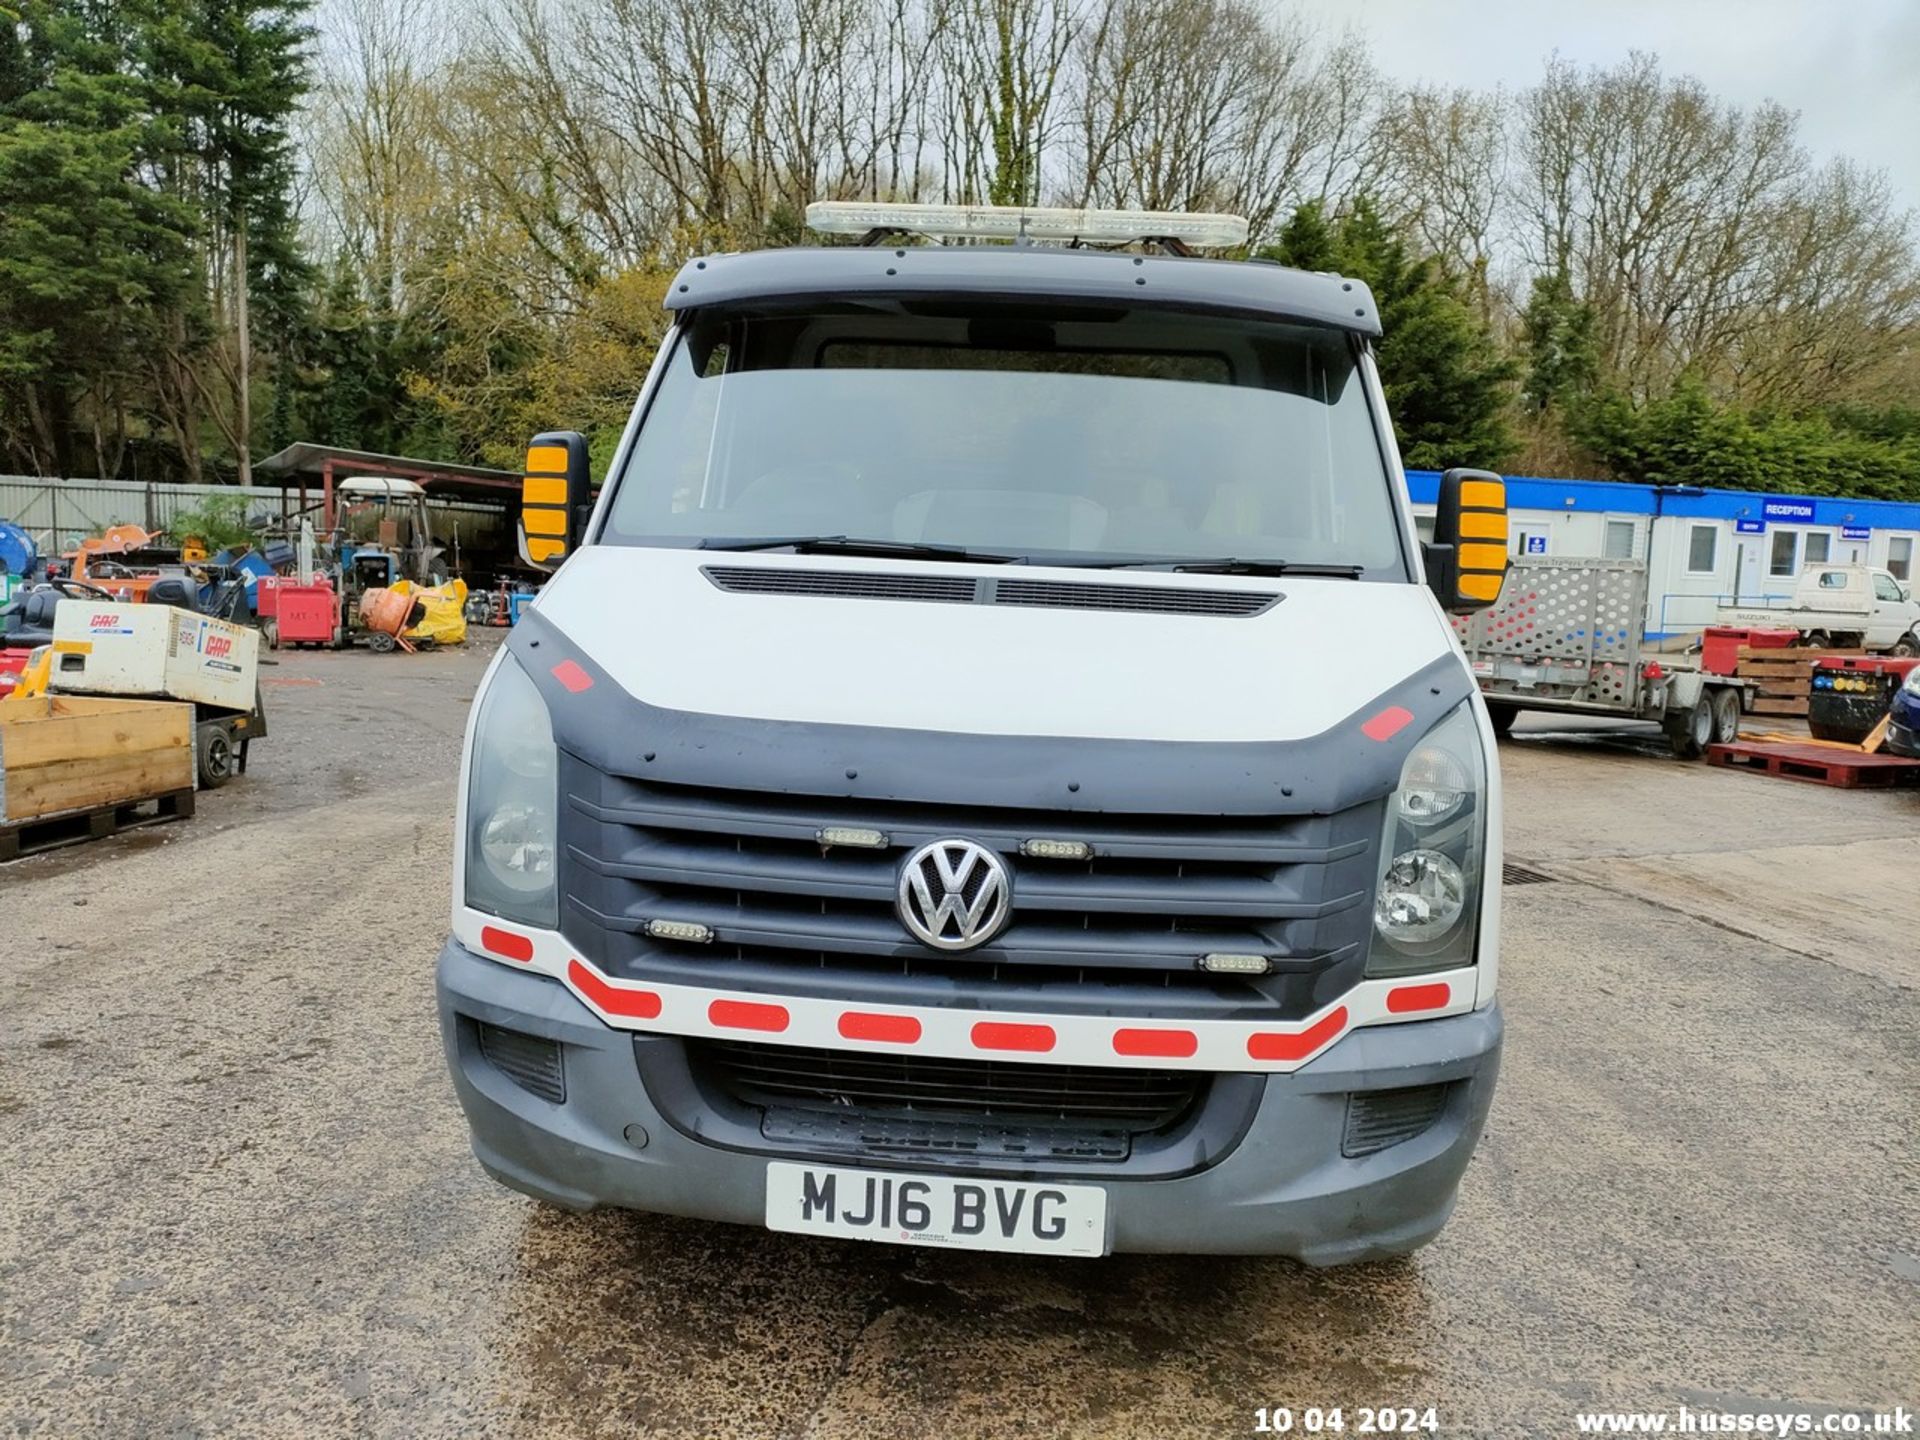 16/16 VOLKSWAGEN CRAFTER CR35 TDI - 1968cc 2dr (White, 146k) - Image 10 of 52